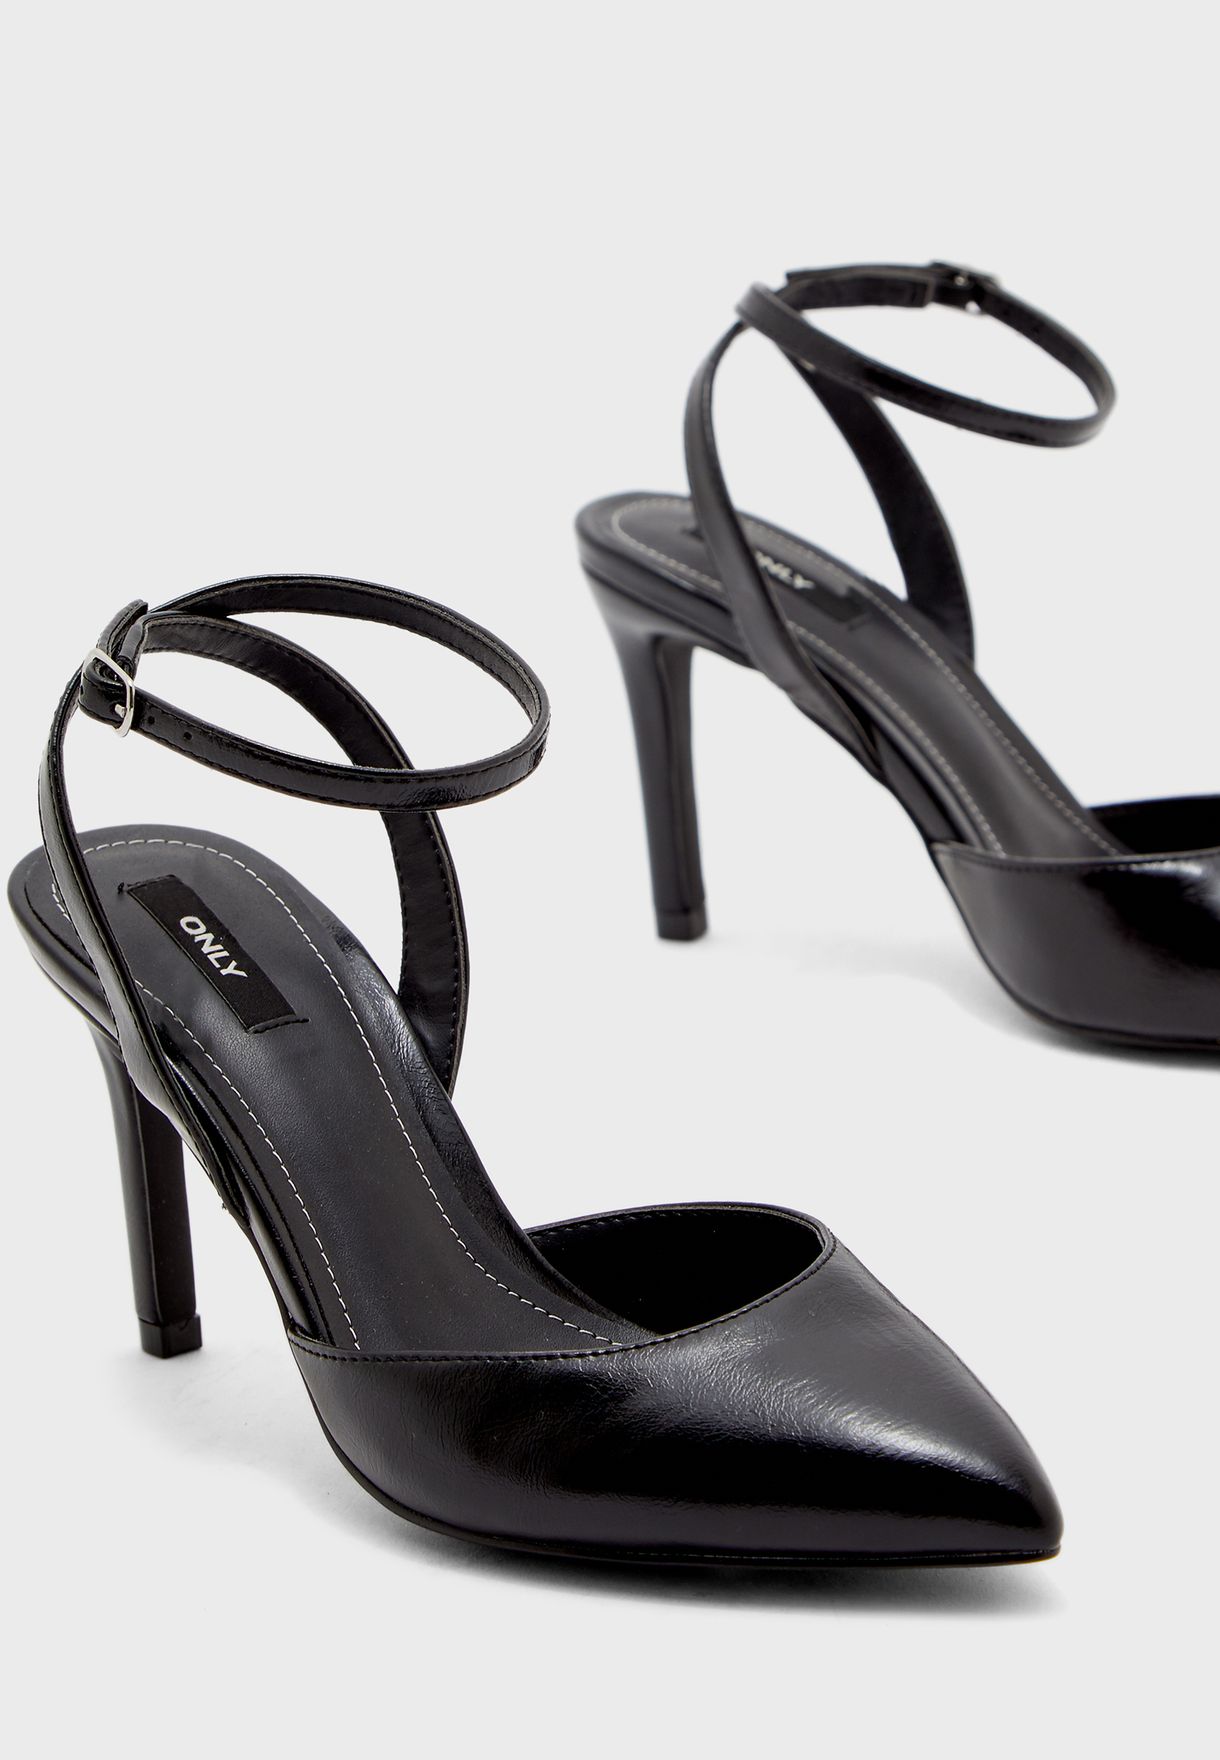 black high heel pumps with ankle strap